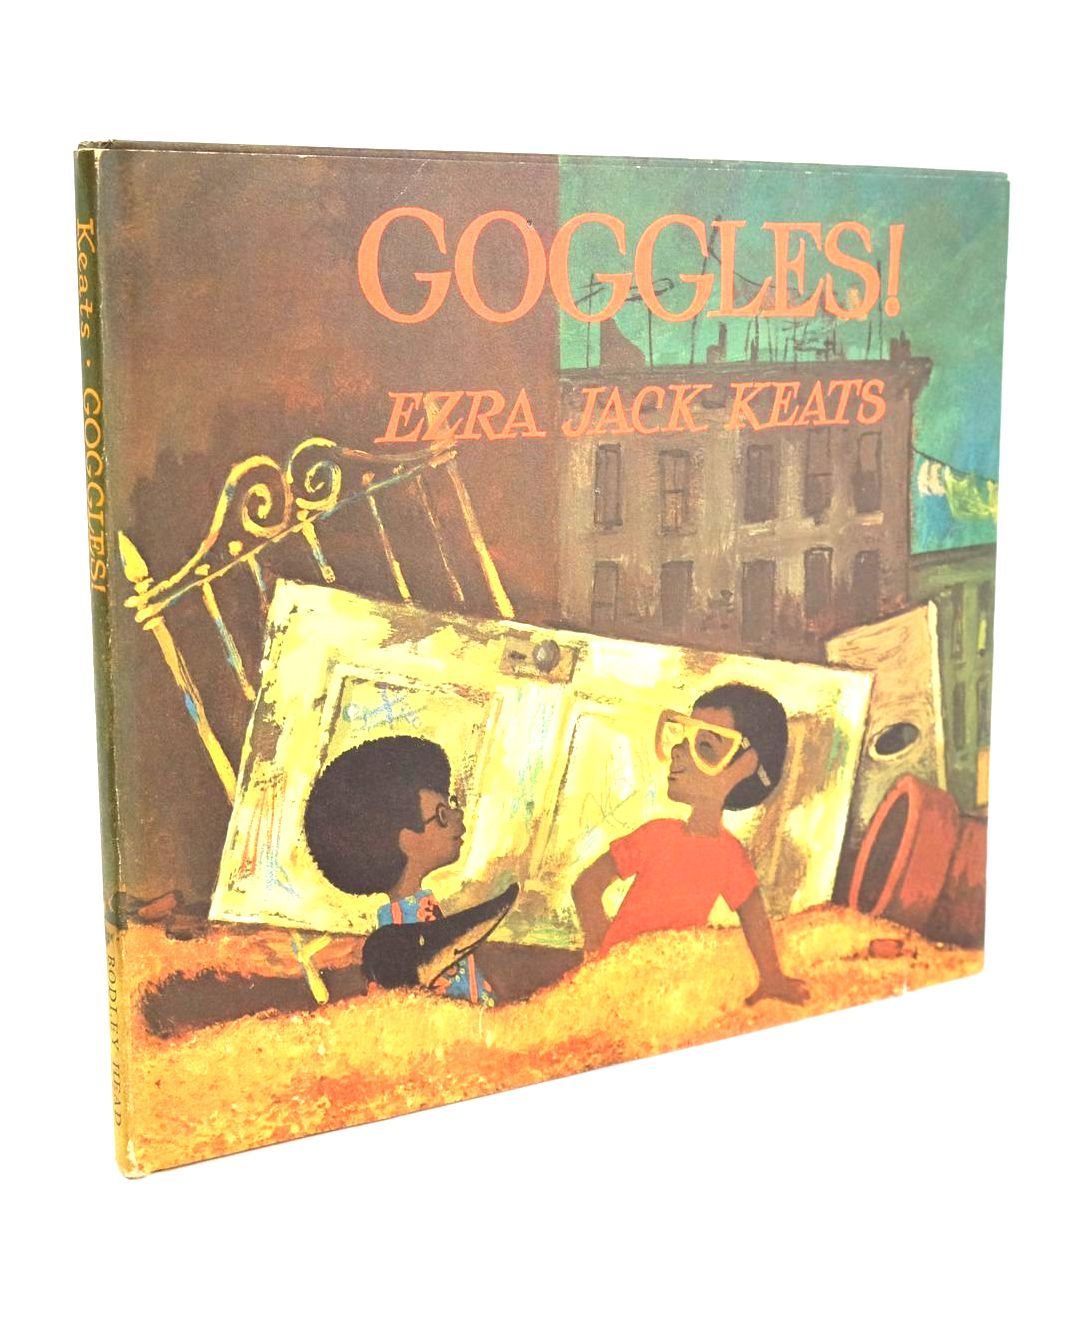 Photo of GOGGLES! written by Keats, Ezra Jack illustrated by Keats, Ezra Jack published by The Bodley Head Ltd (STOCK CODE: 1324234)  for sale by Stella & Rose's Books